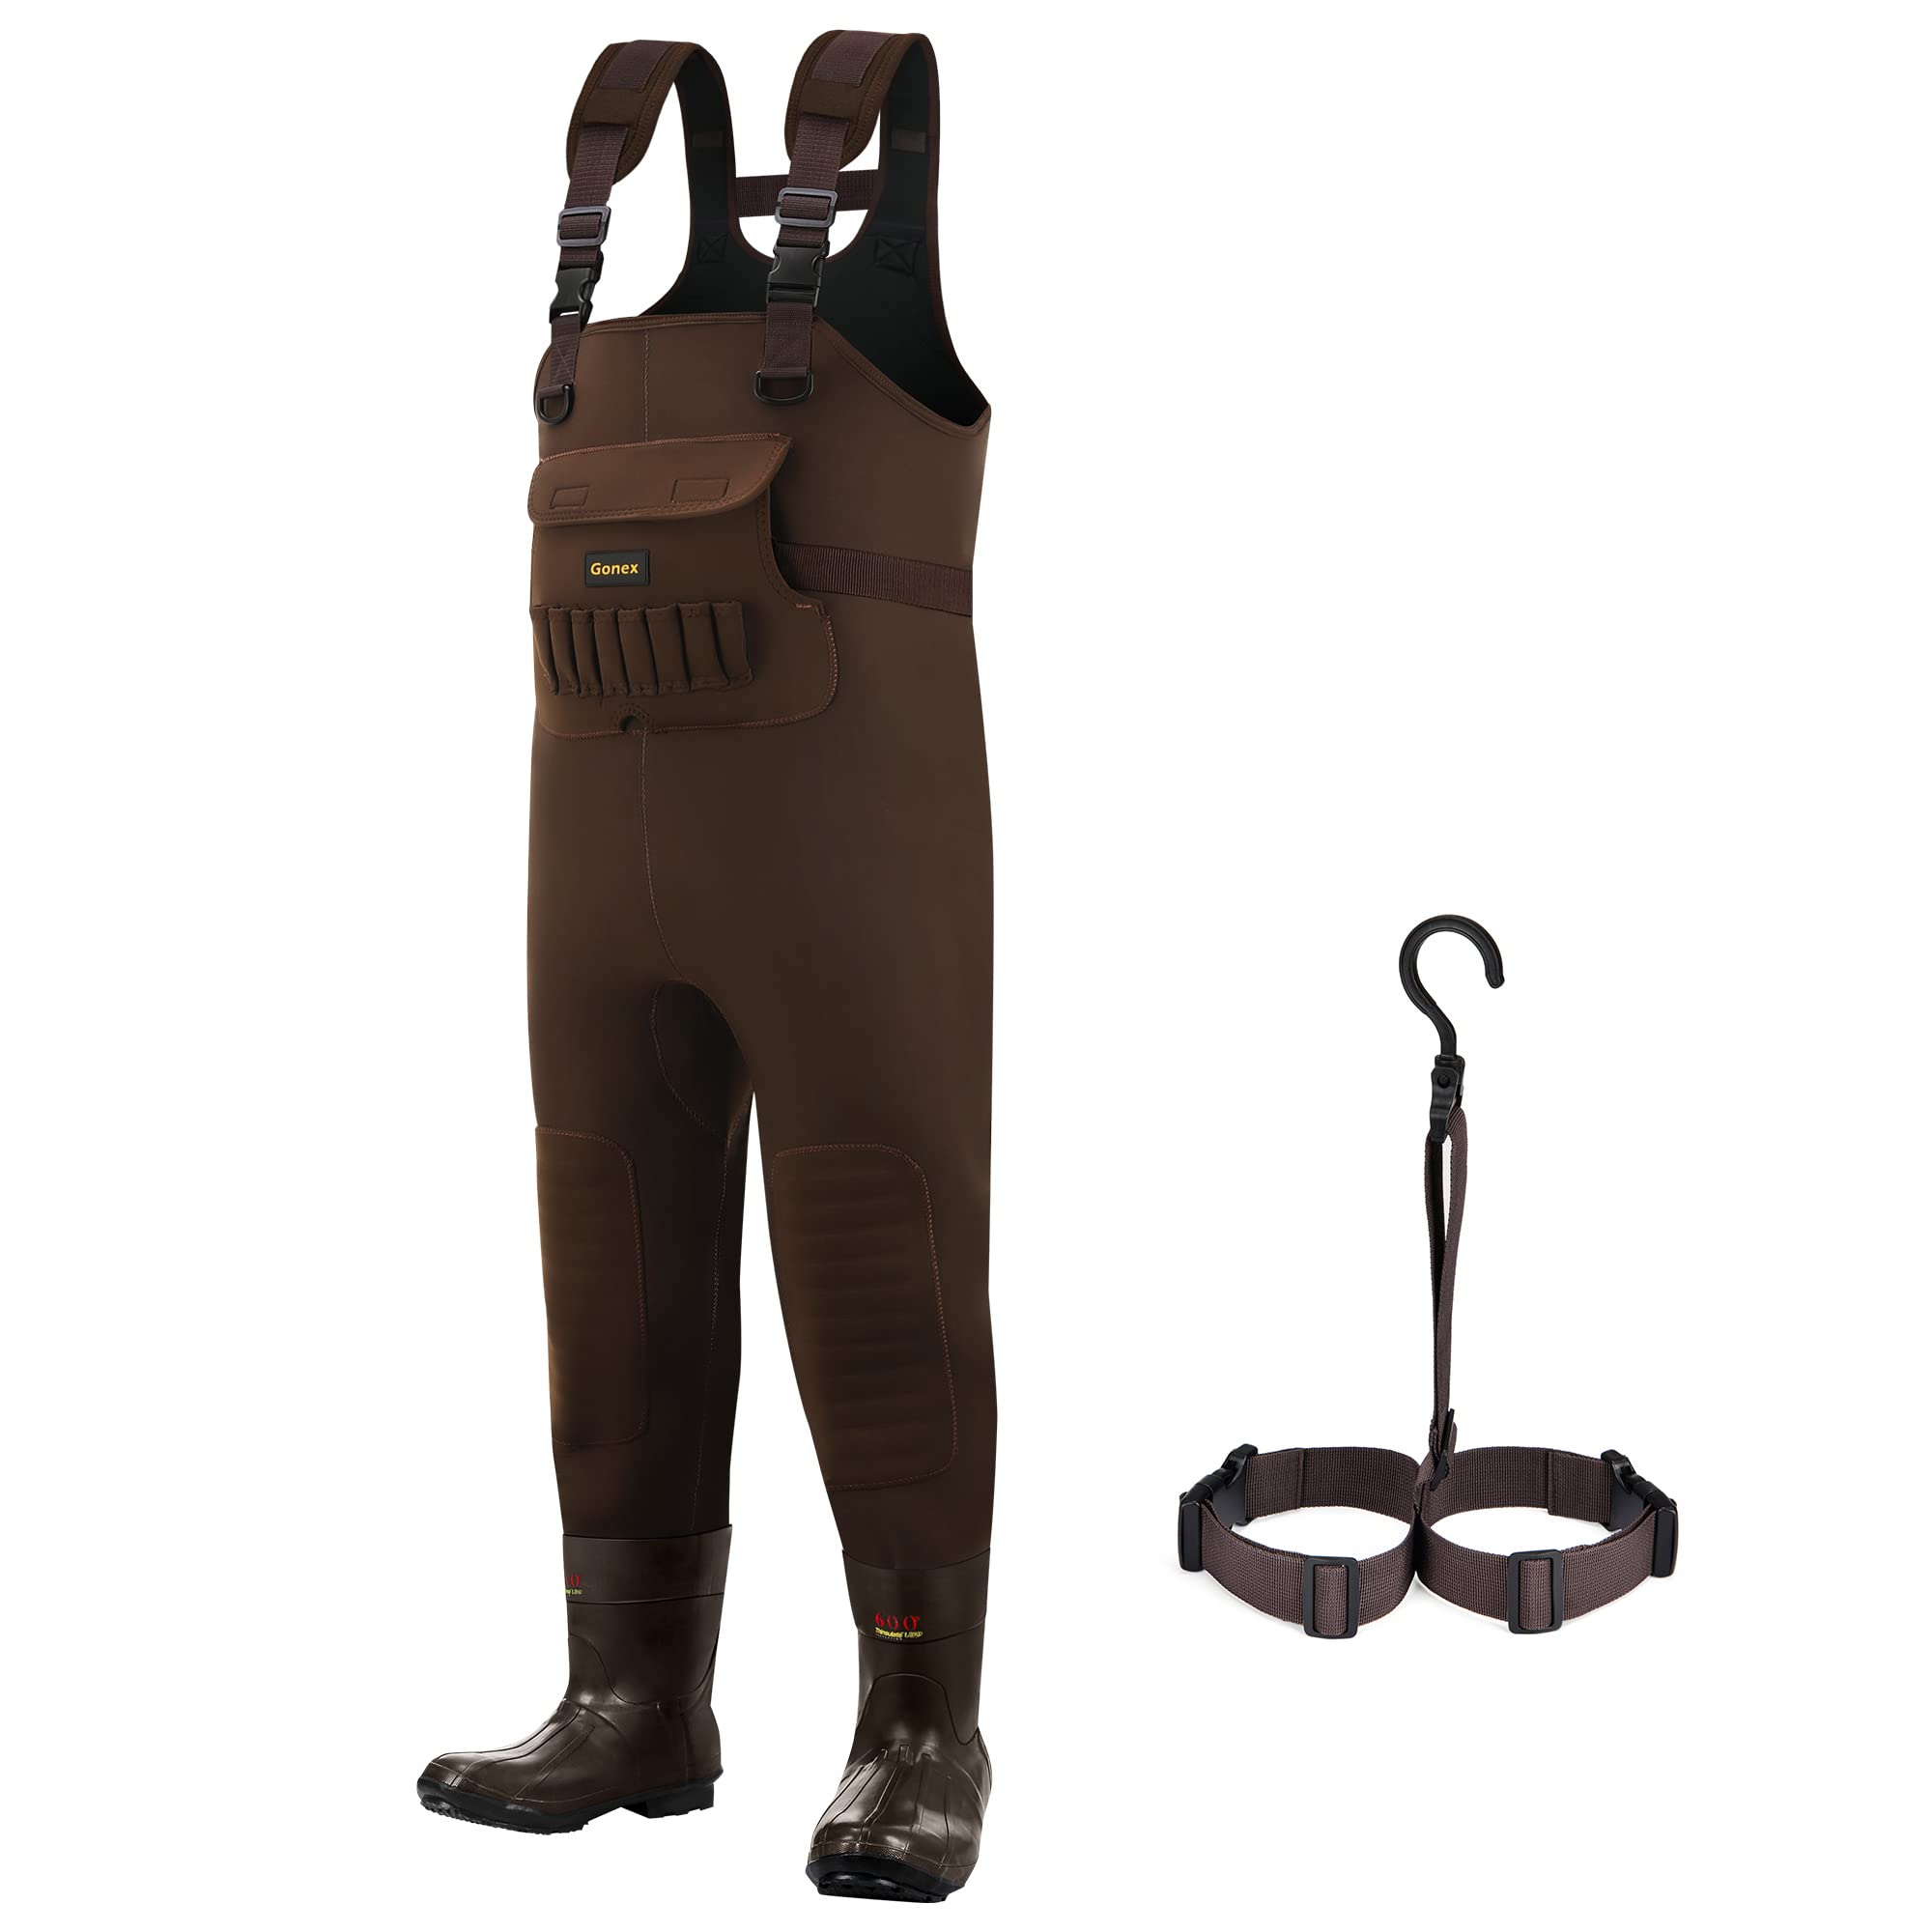 Gonex Neoprene Chest Hunting Waders with 600G/800G Insulated Boots 100%  Waterproof Fishing Waders for Men Duck Hunting Dark Brown(with 600g Boots)  M 10